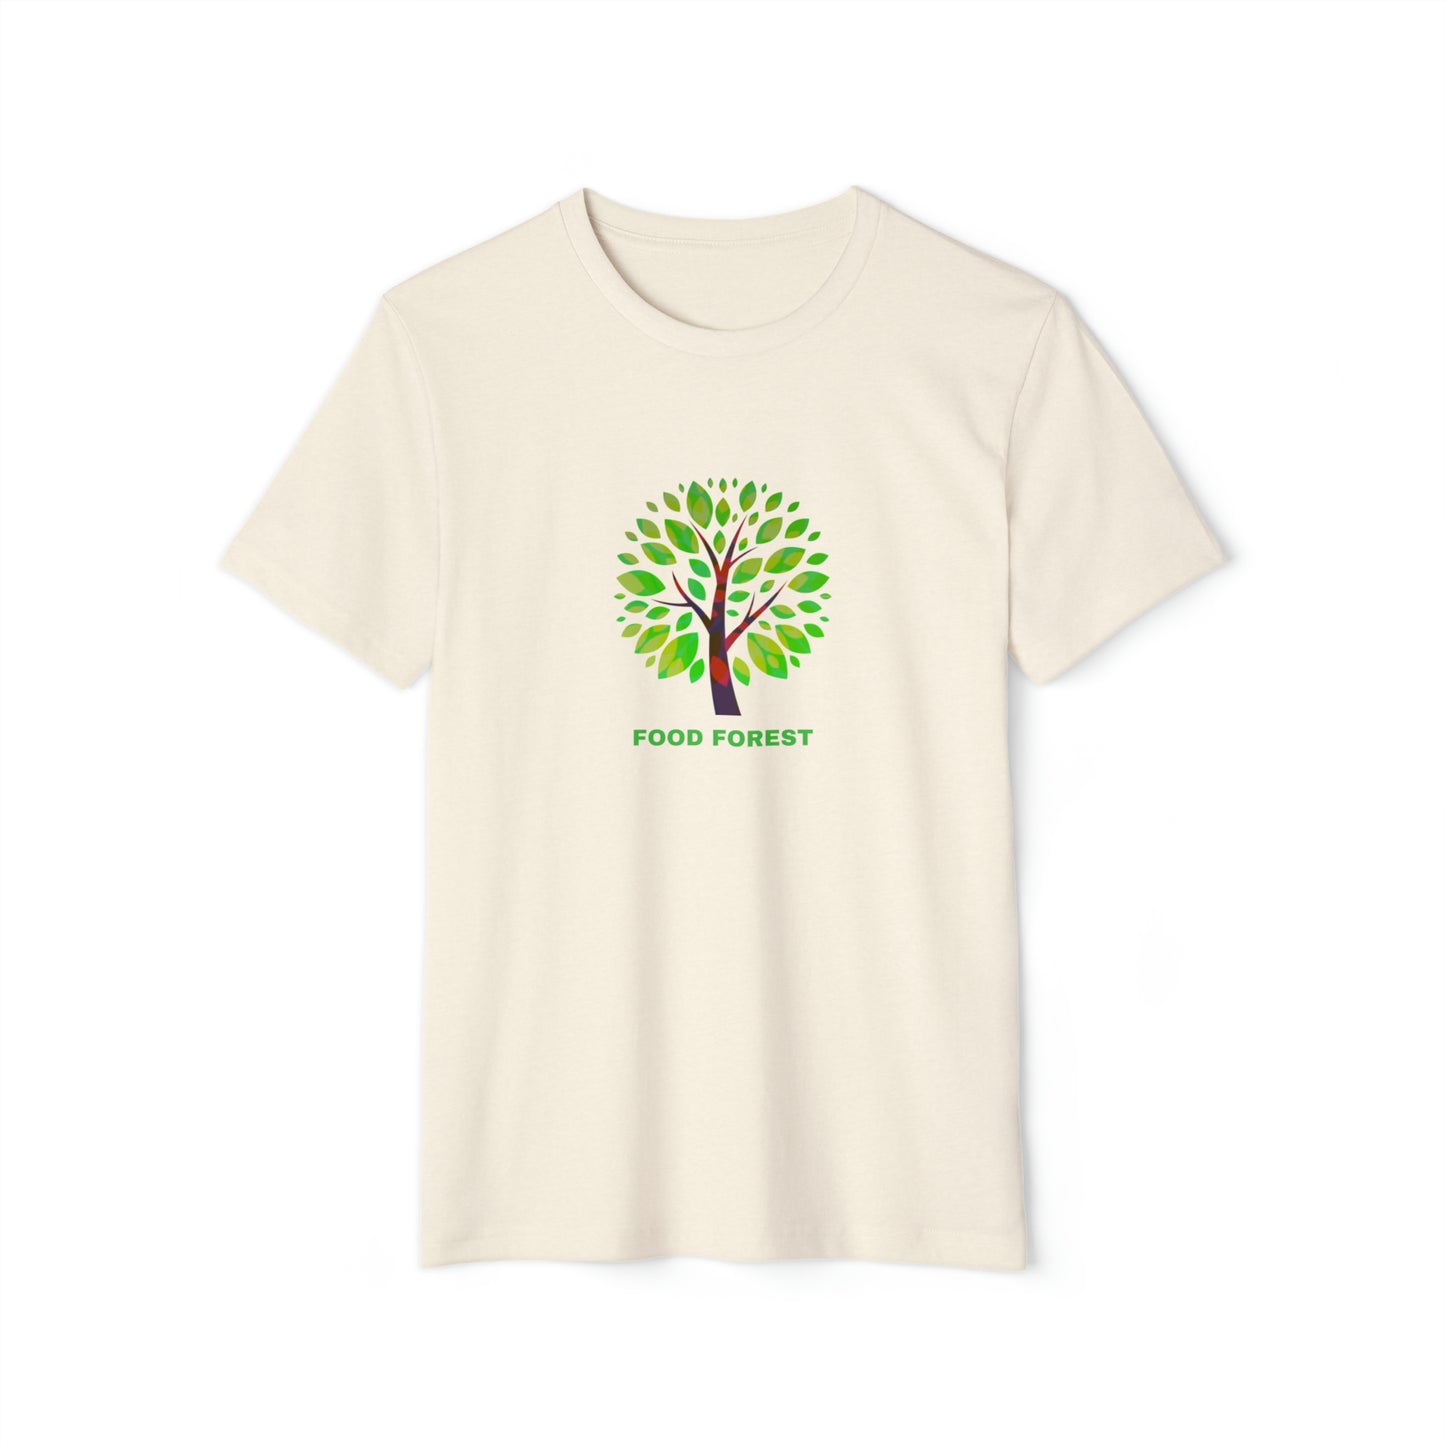 FOOD FOREST, Unisex Recycled Organic T-Shirt